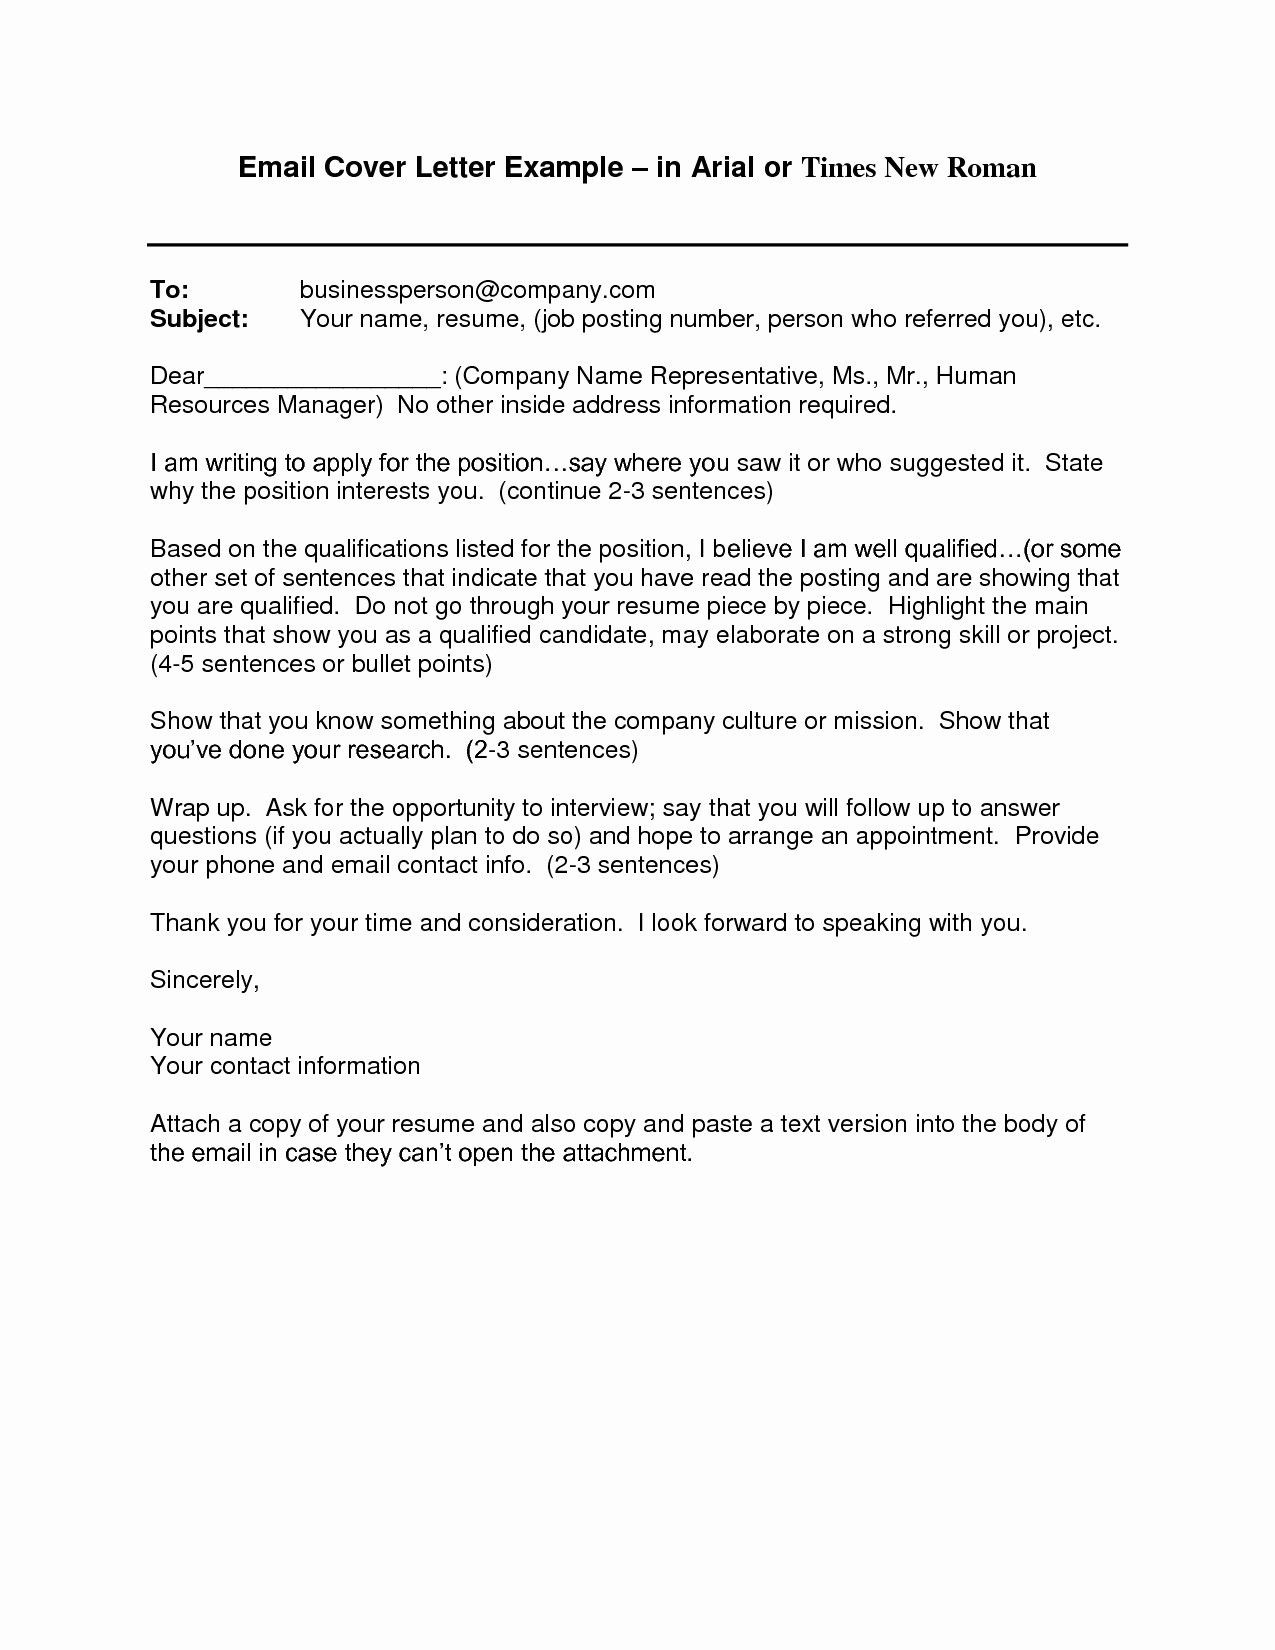 Sample Cover Email Letter Resume attached Sample Email with Resume attached – Good Resume Examples